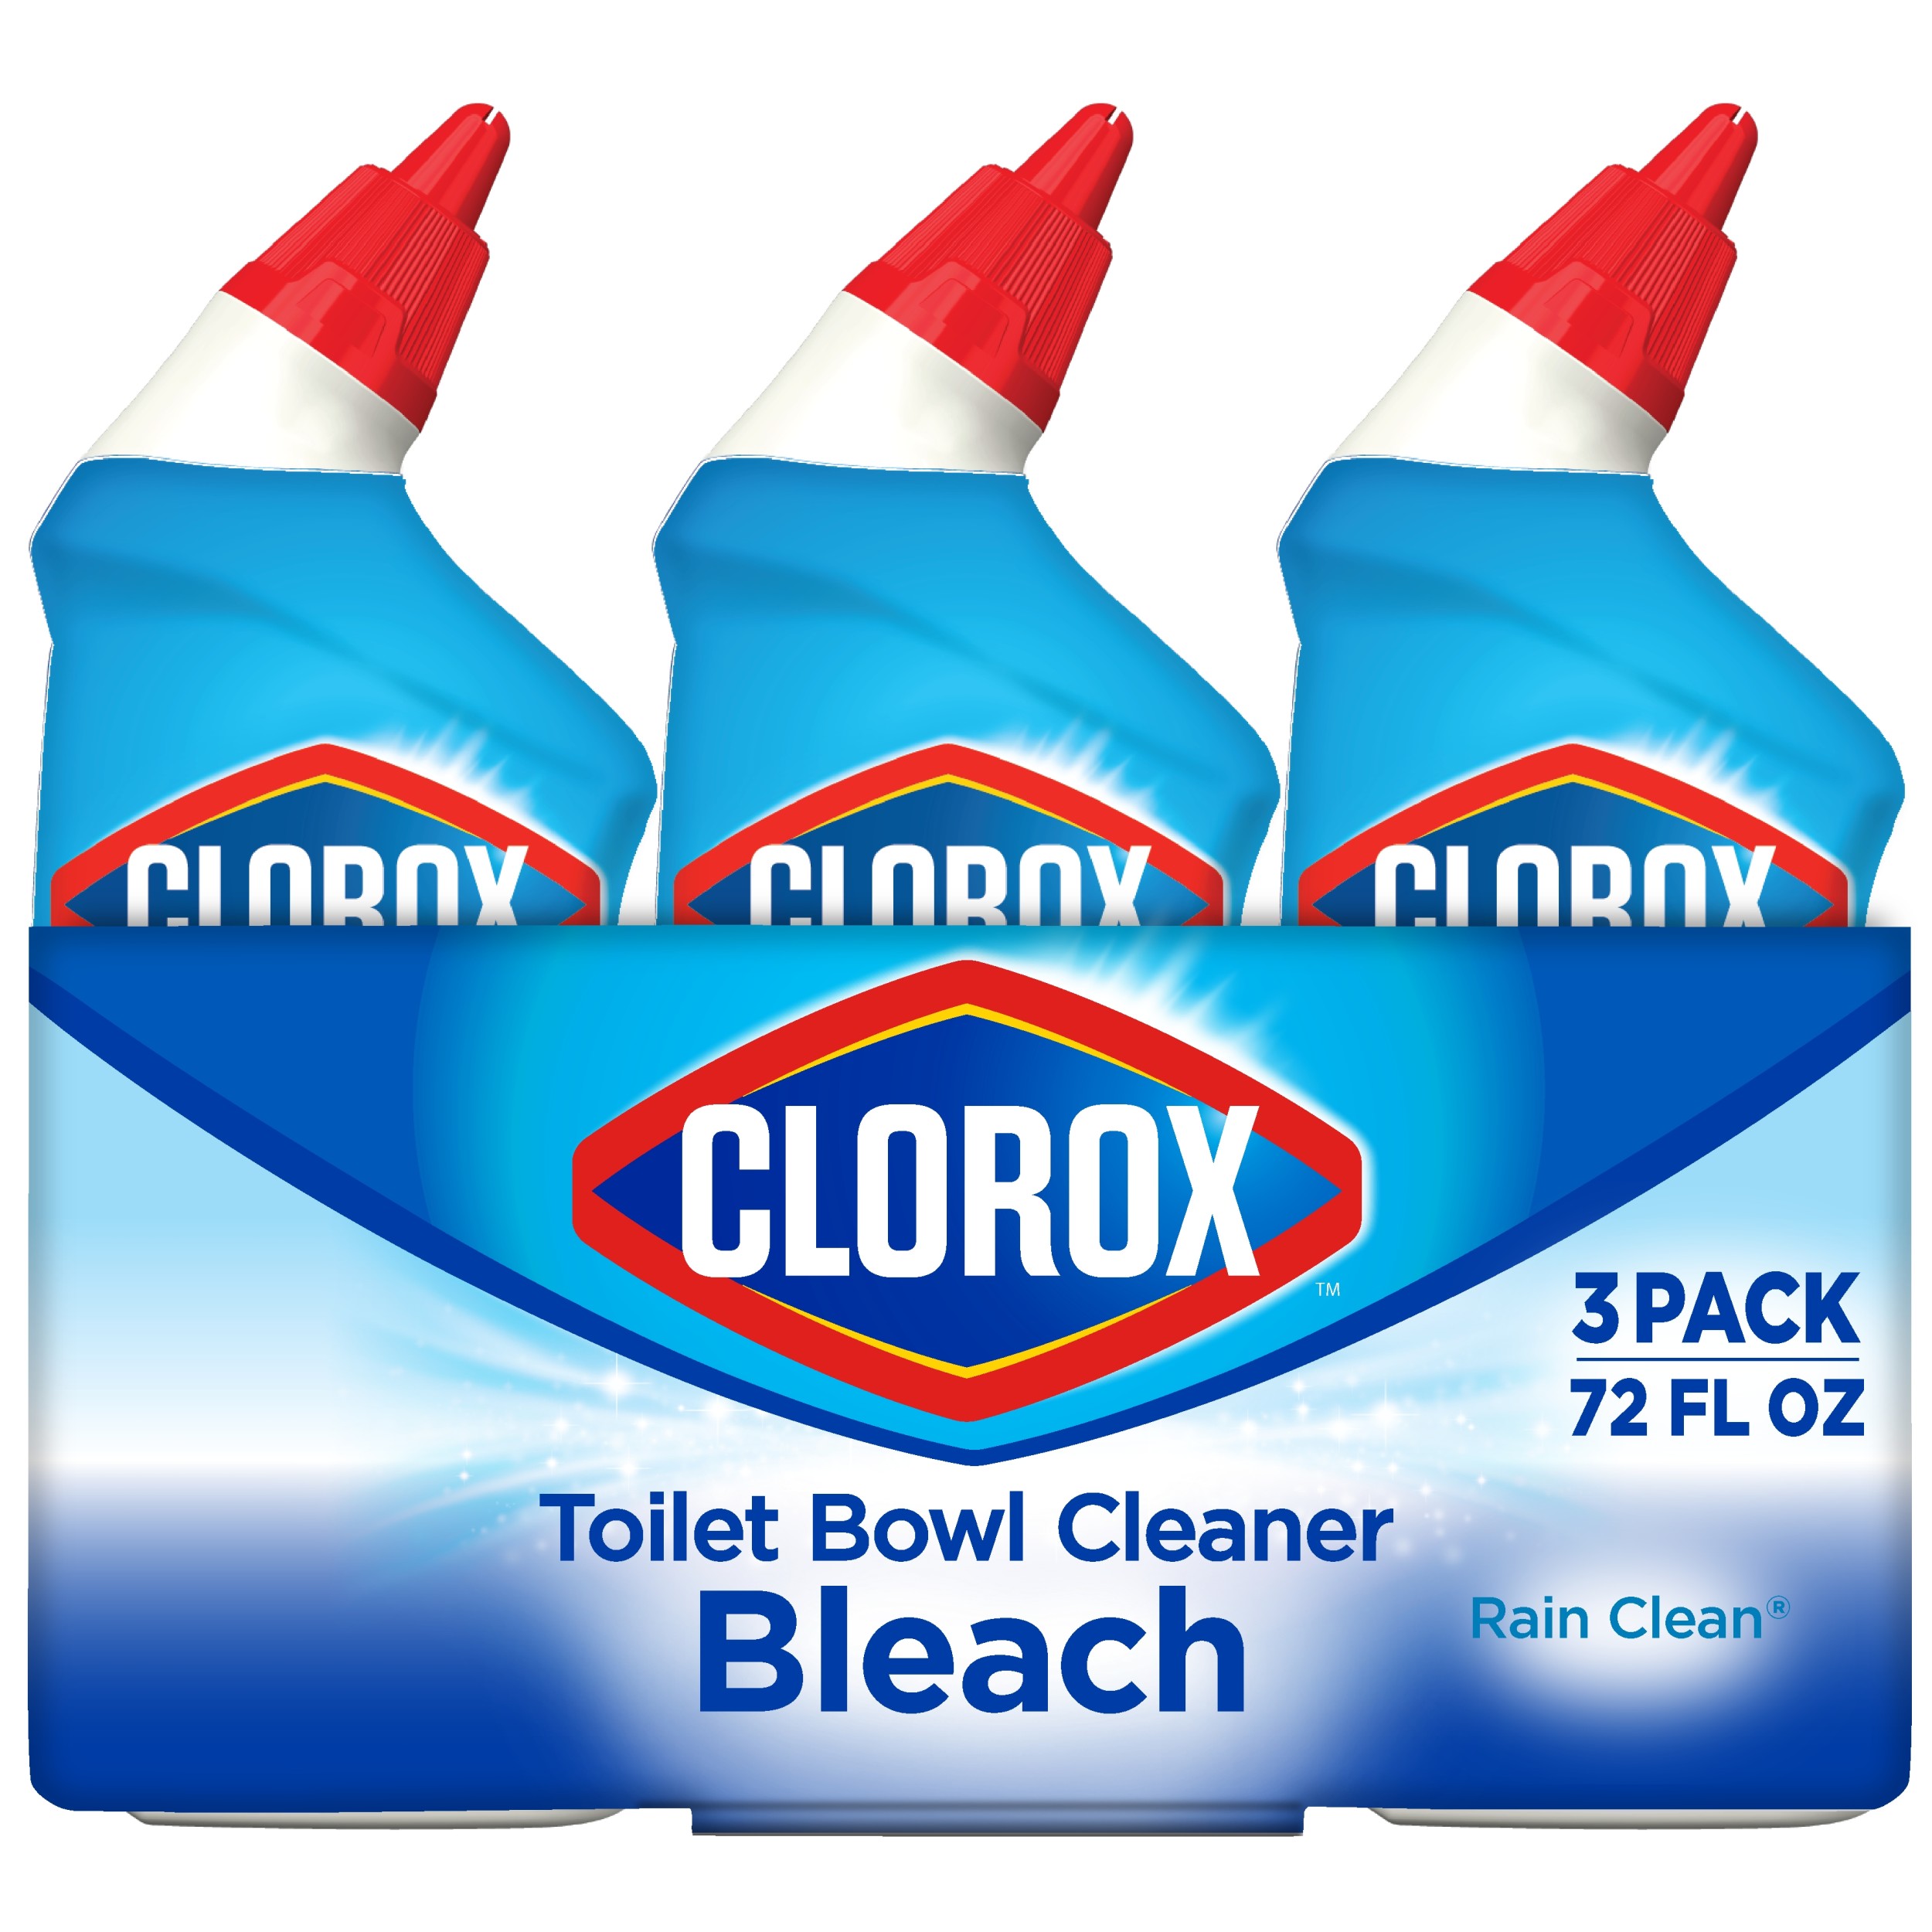 Clorox Toilet Bowl Cleaner with Bleach, Rain Clean - 24 Ounces, 3 Pack - image 1 of 19